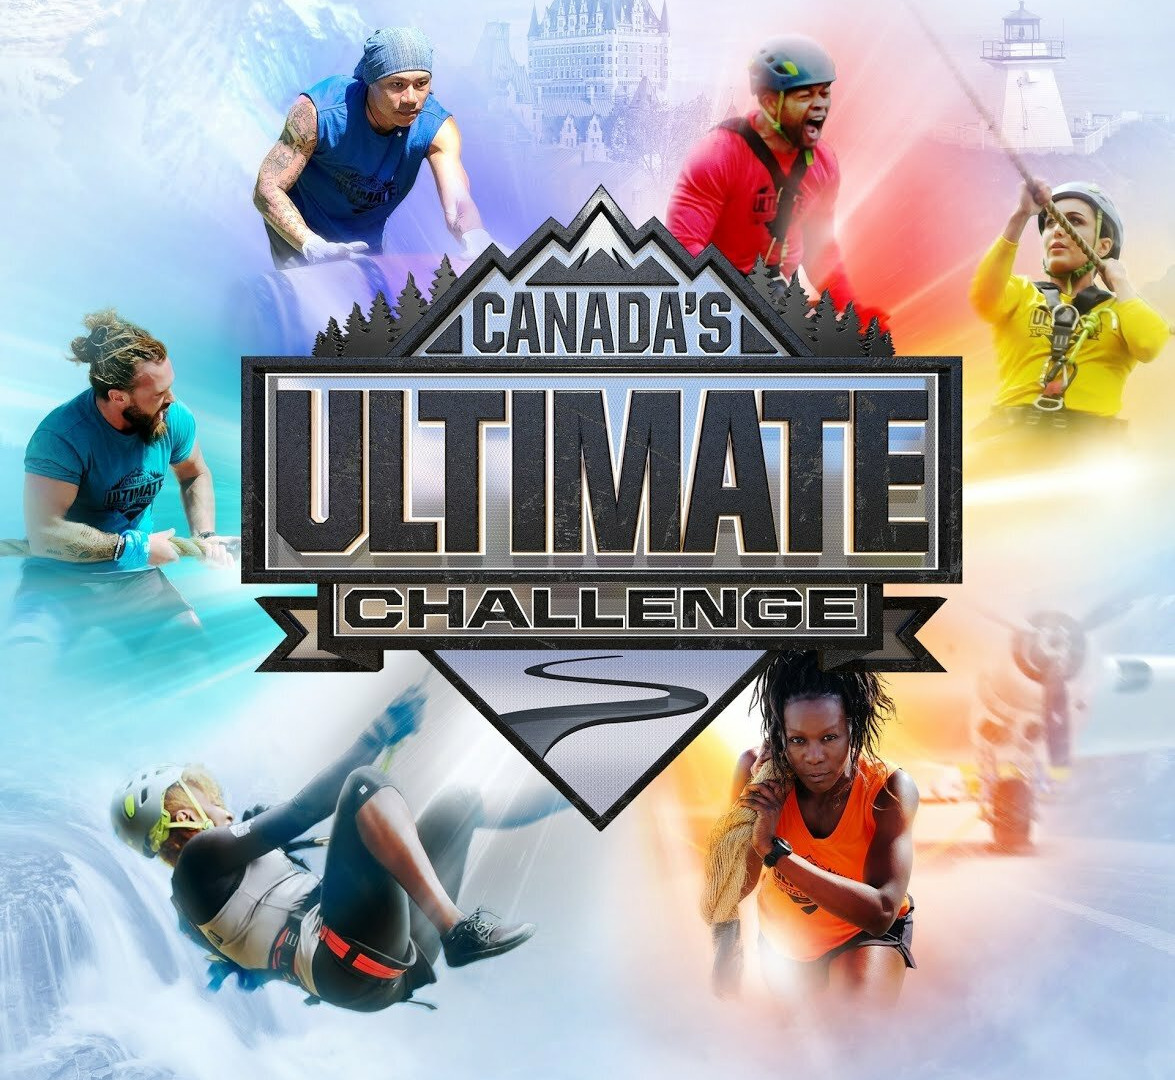 Show Canada's Ultimate Challenge